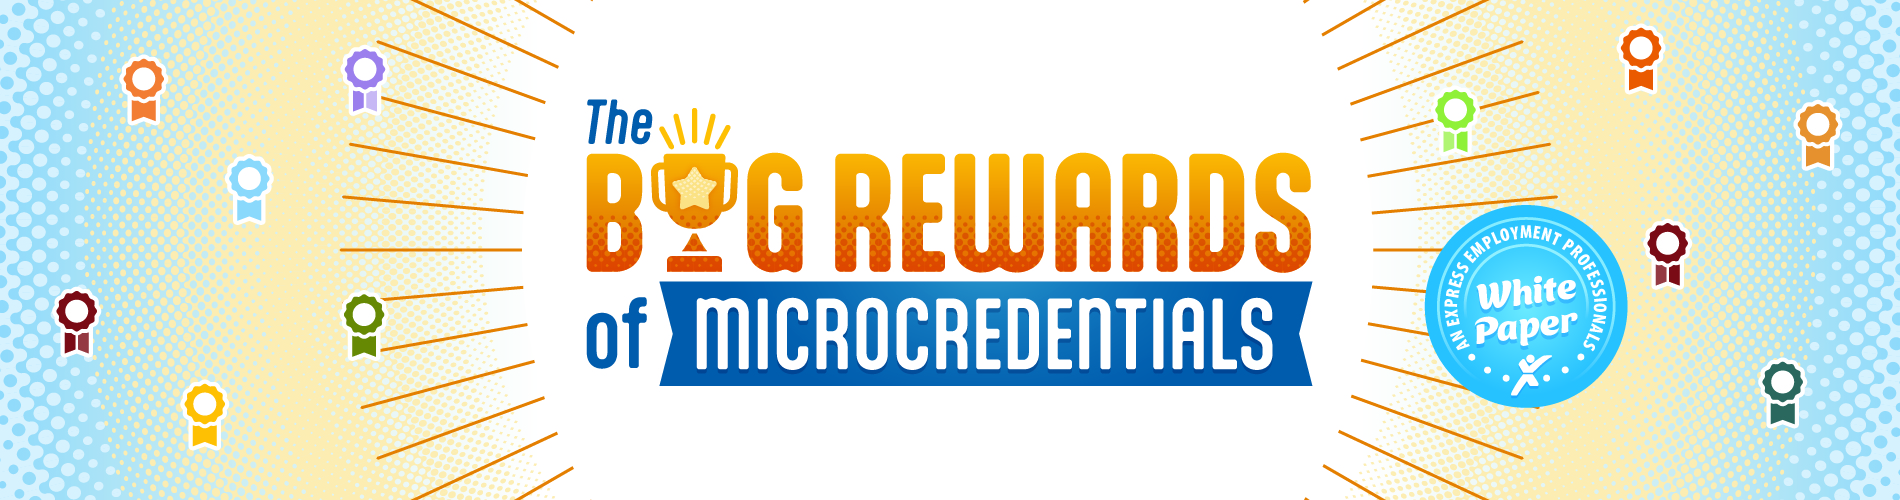 10-25-23-MicroCredential-Banner-AE